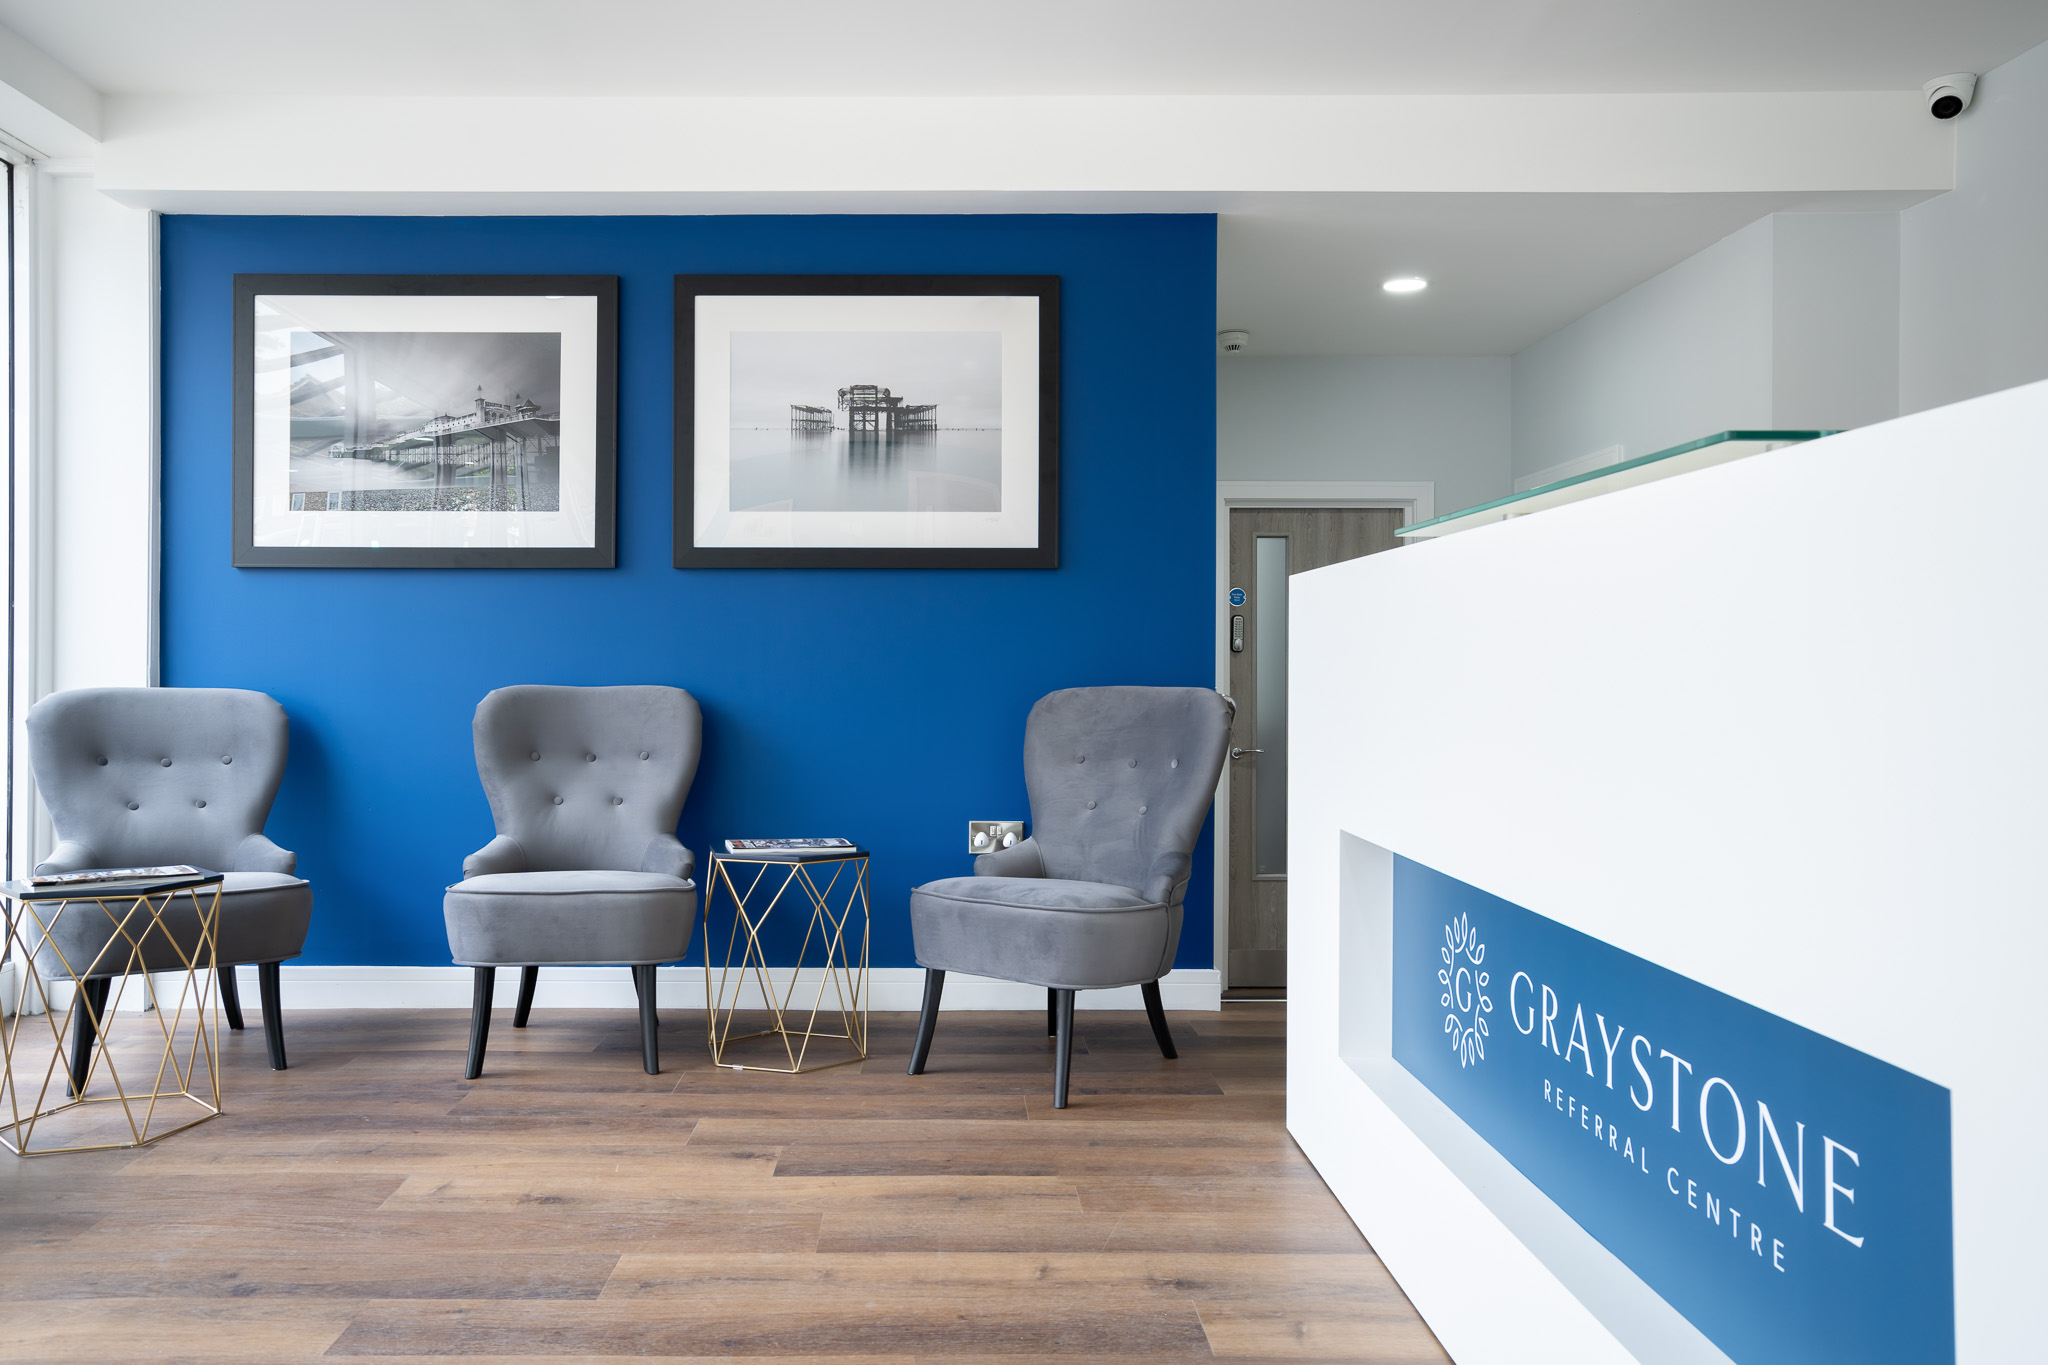 Featured Project – The Graystone Referral Centre in Hassocks